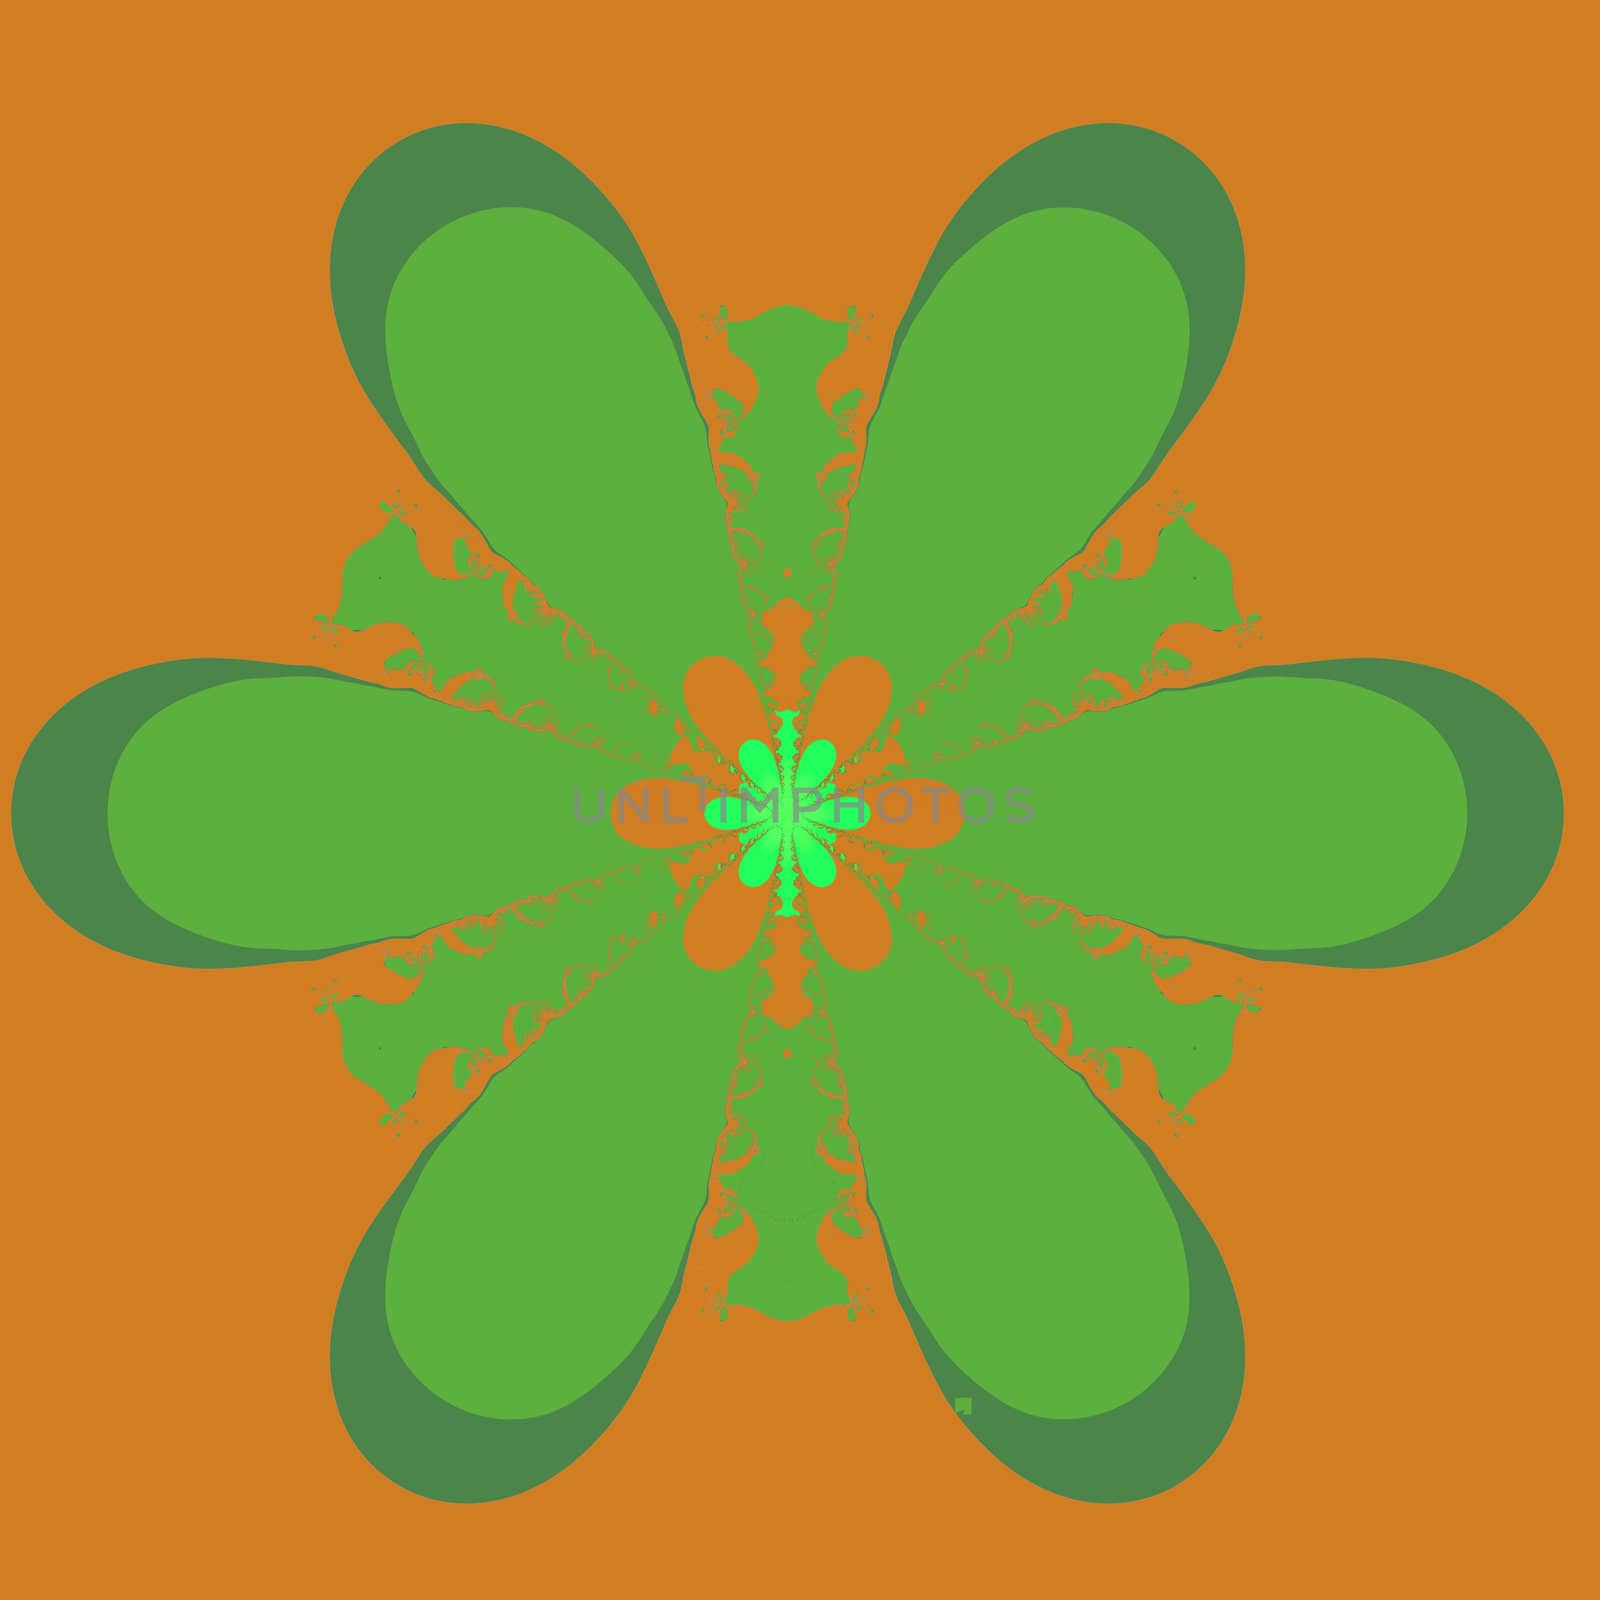 An abstract fractal done in shades of green and orange.